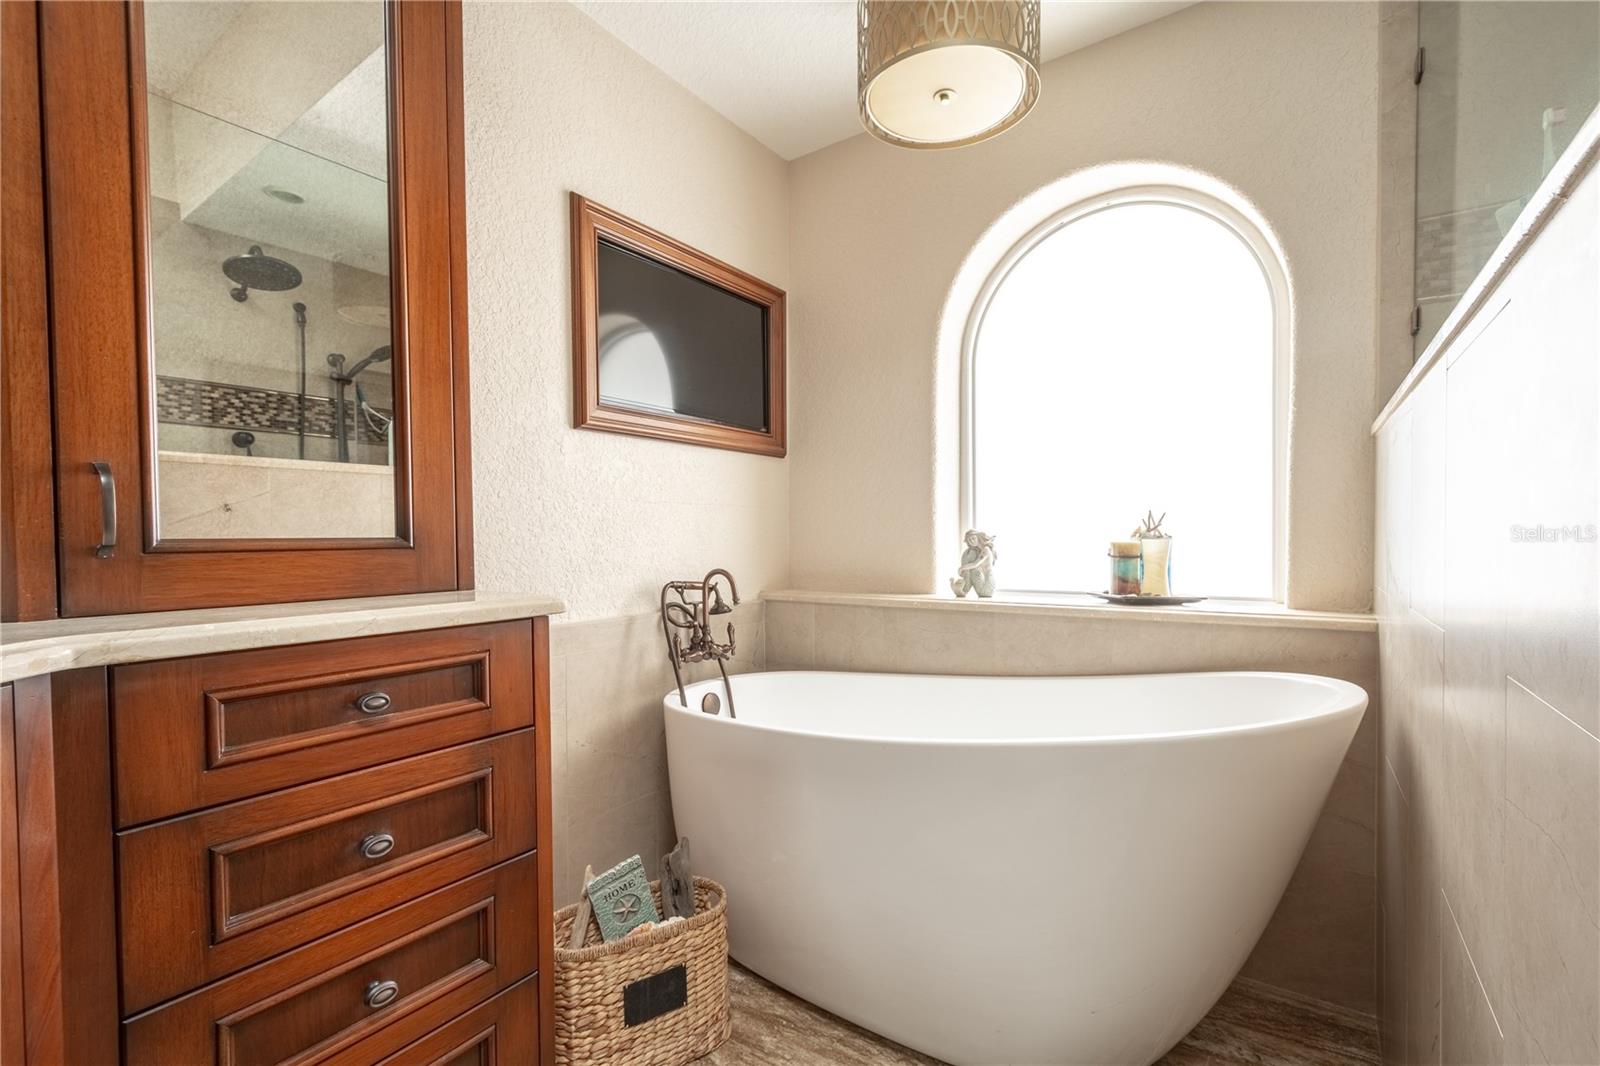 The en-suite bath features his and hers mirrored vanities in wood cabinetry.